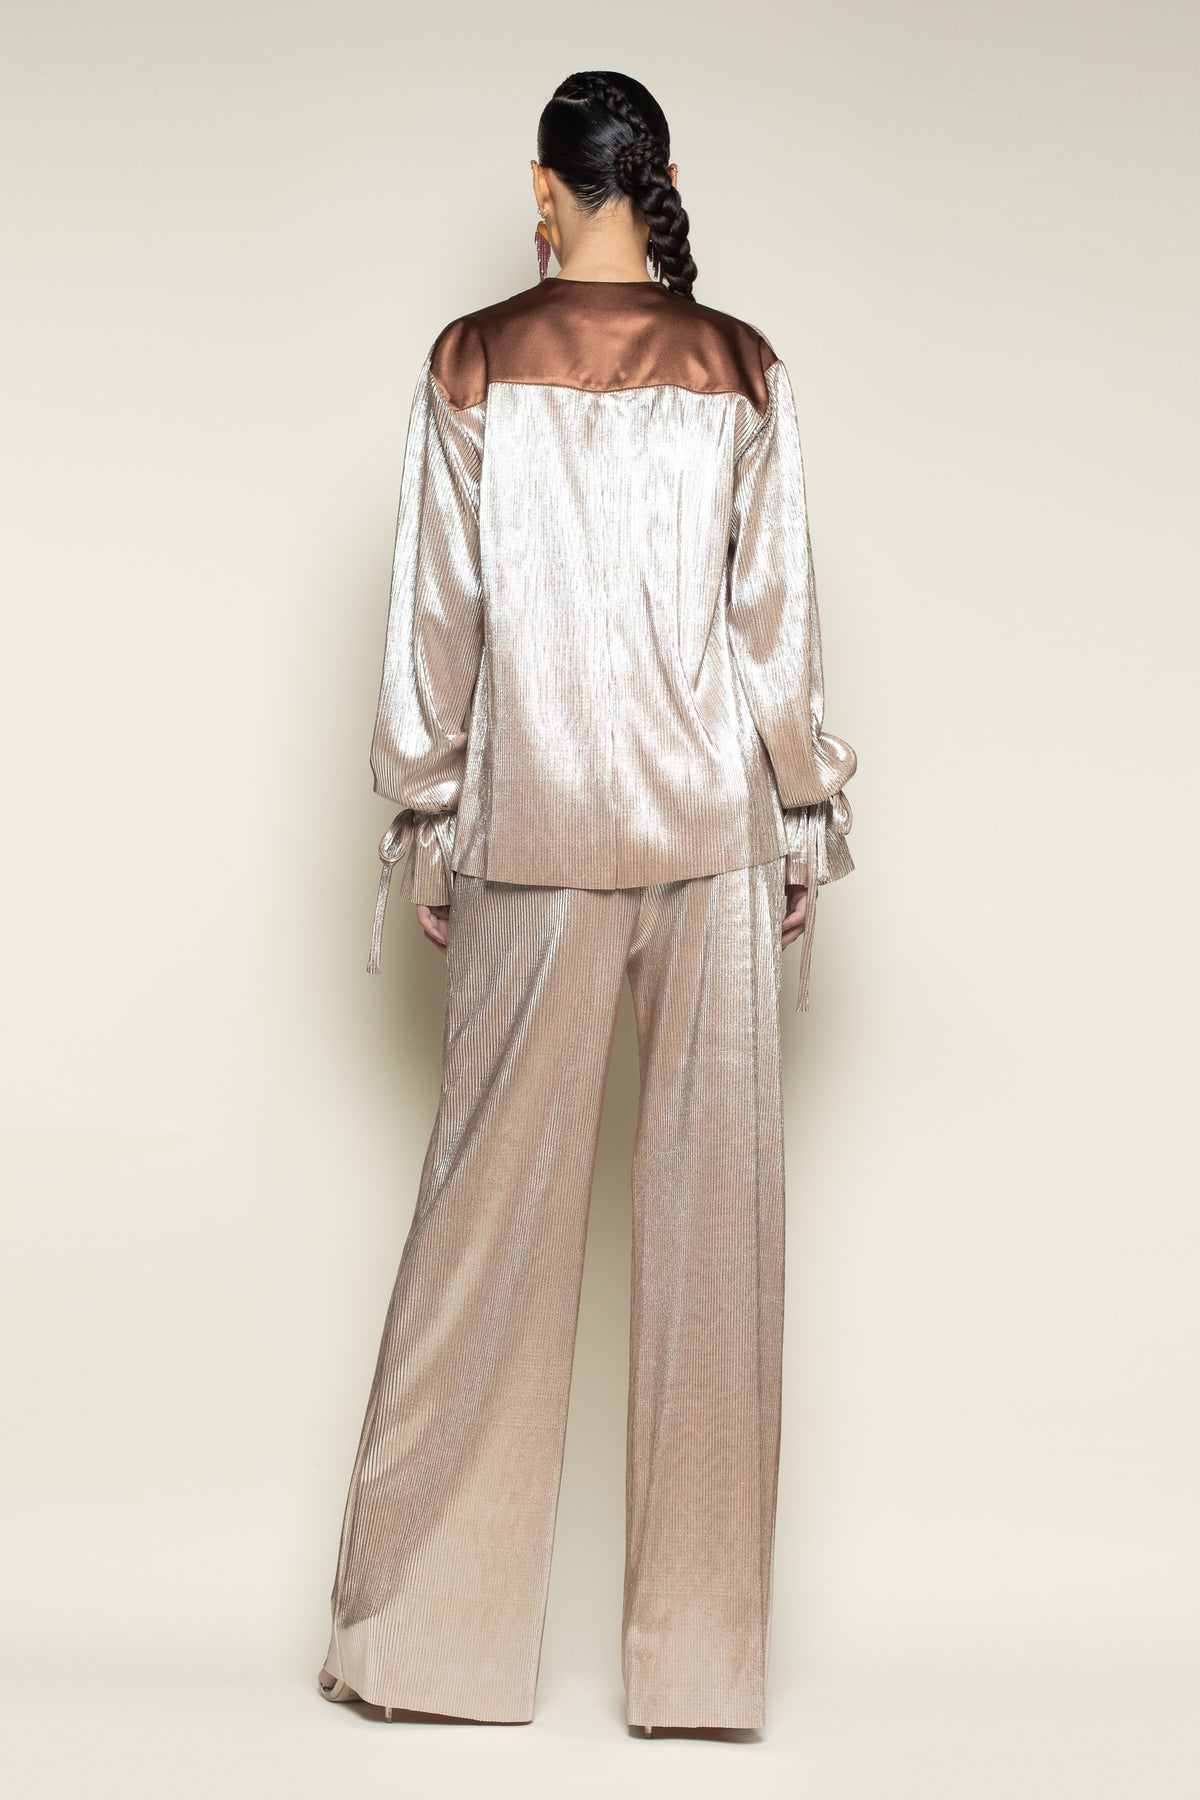 La Shams Loose Leg Casual Solid Gold Color Womens Flowy Rayon Palazzo Pants,Gold  color combination